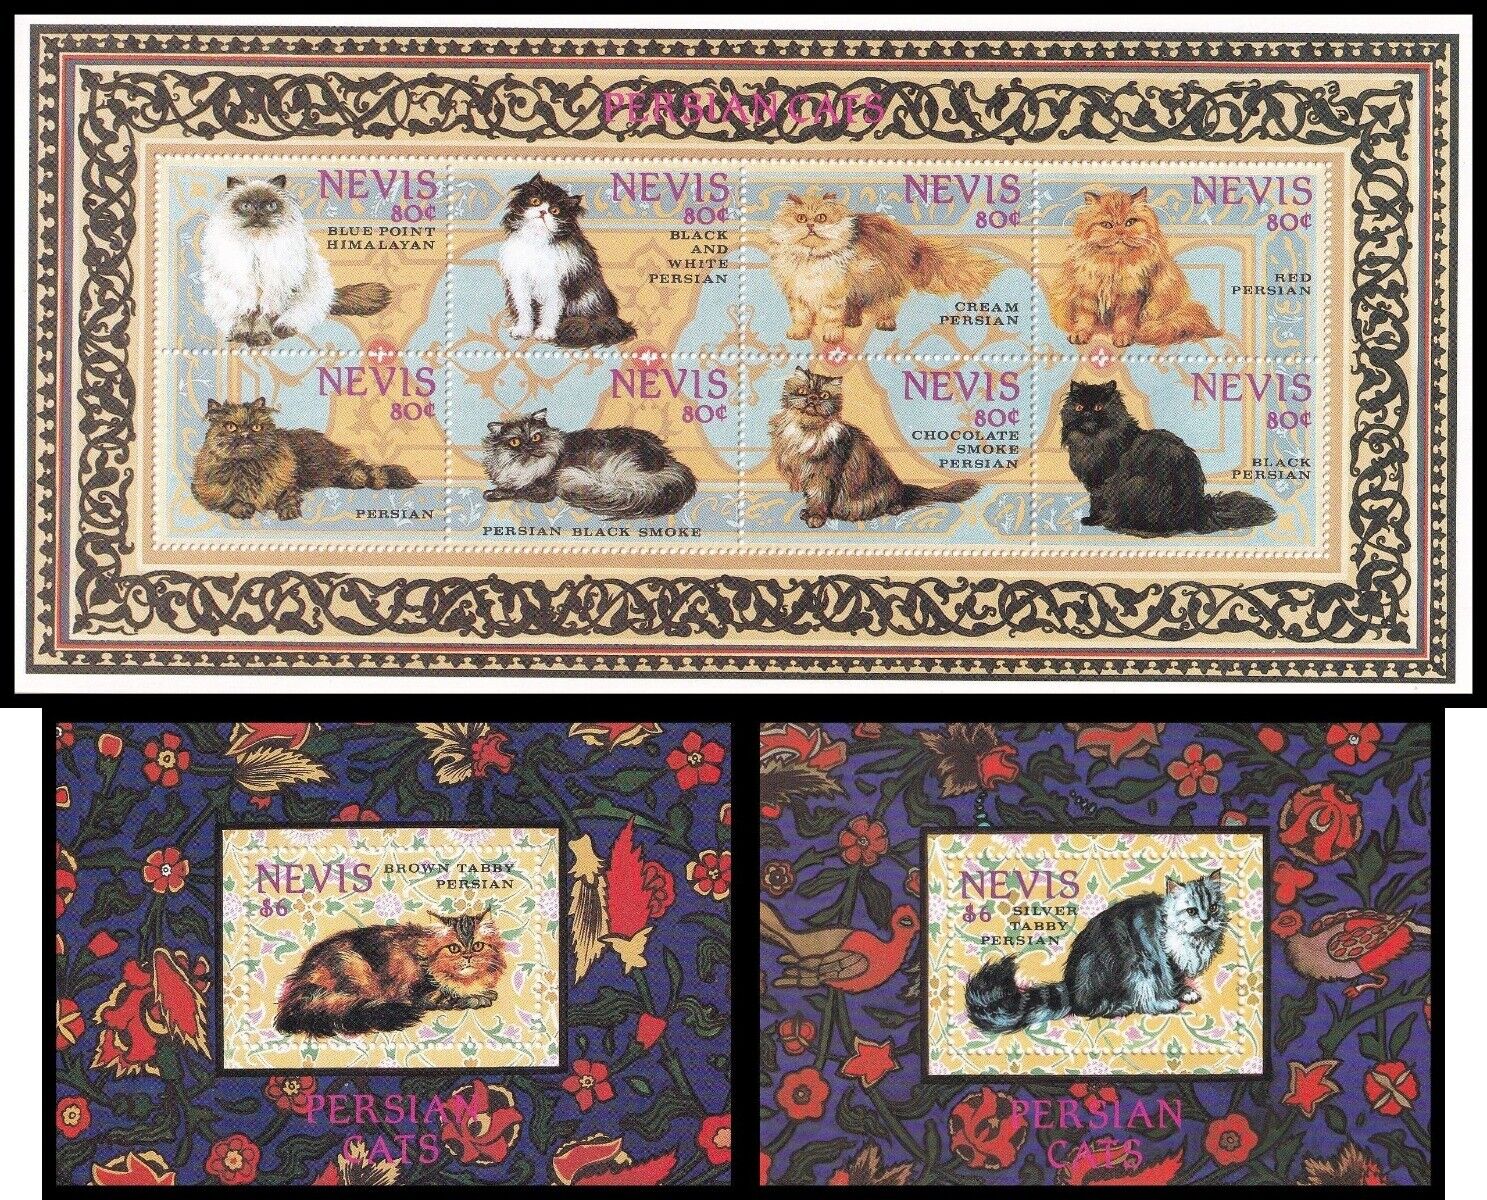 1994 Nevis Persian Cats SG802-809 Sheet MS810 Luxury Factory outlet goods + Miniature Sheets